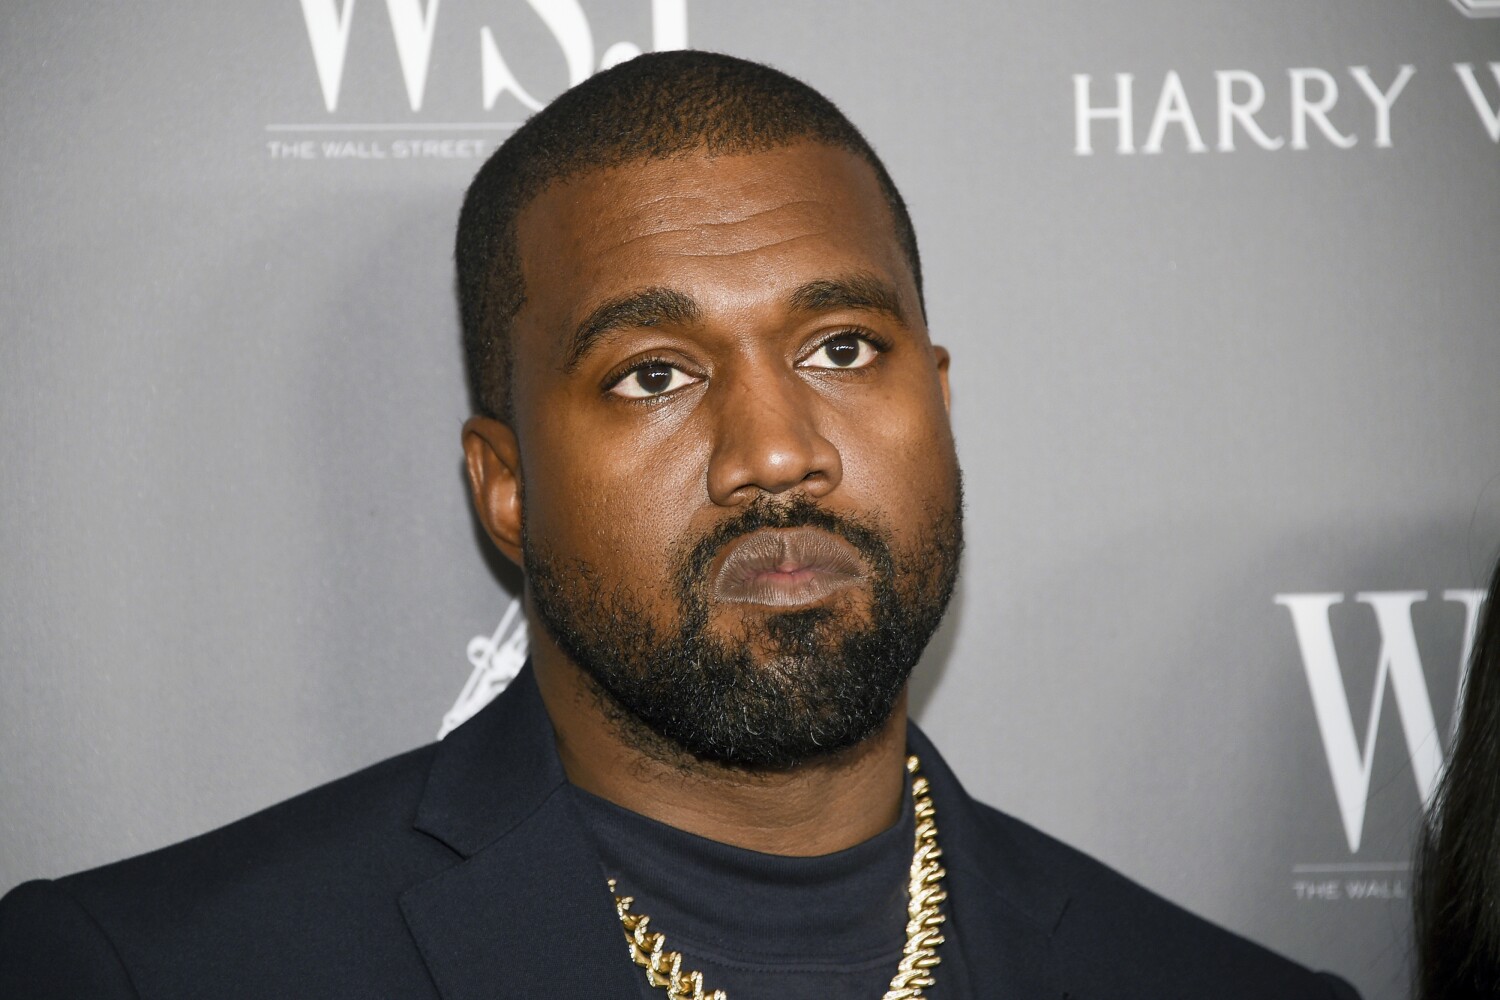 Kanye West won't face charges in punching incident